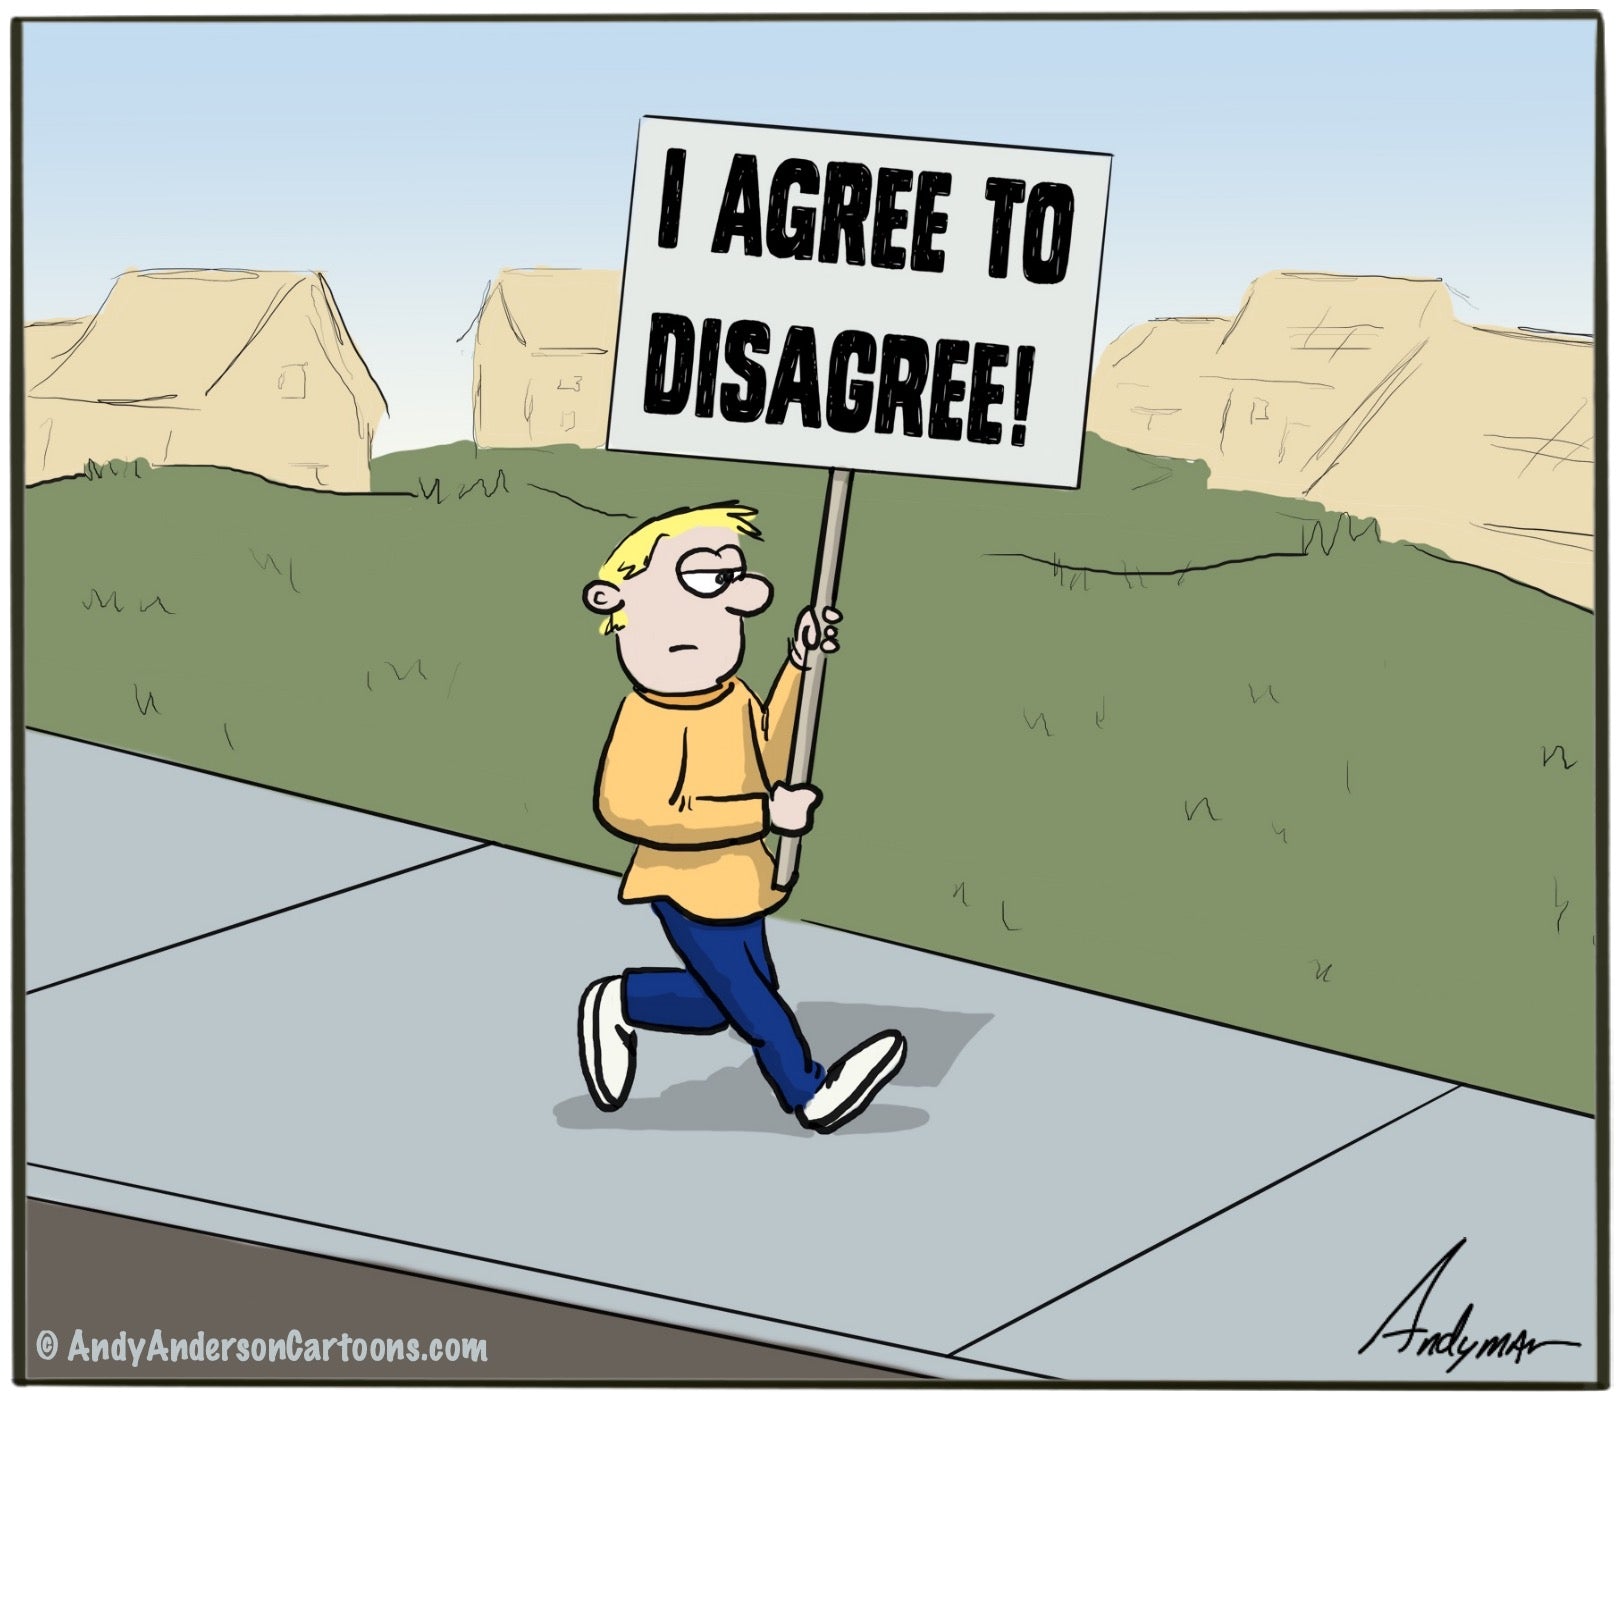 Agree to disagree cartoon by Andy Anderson